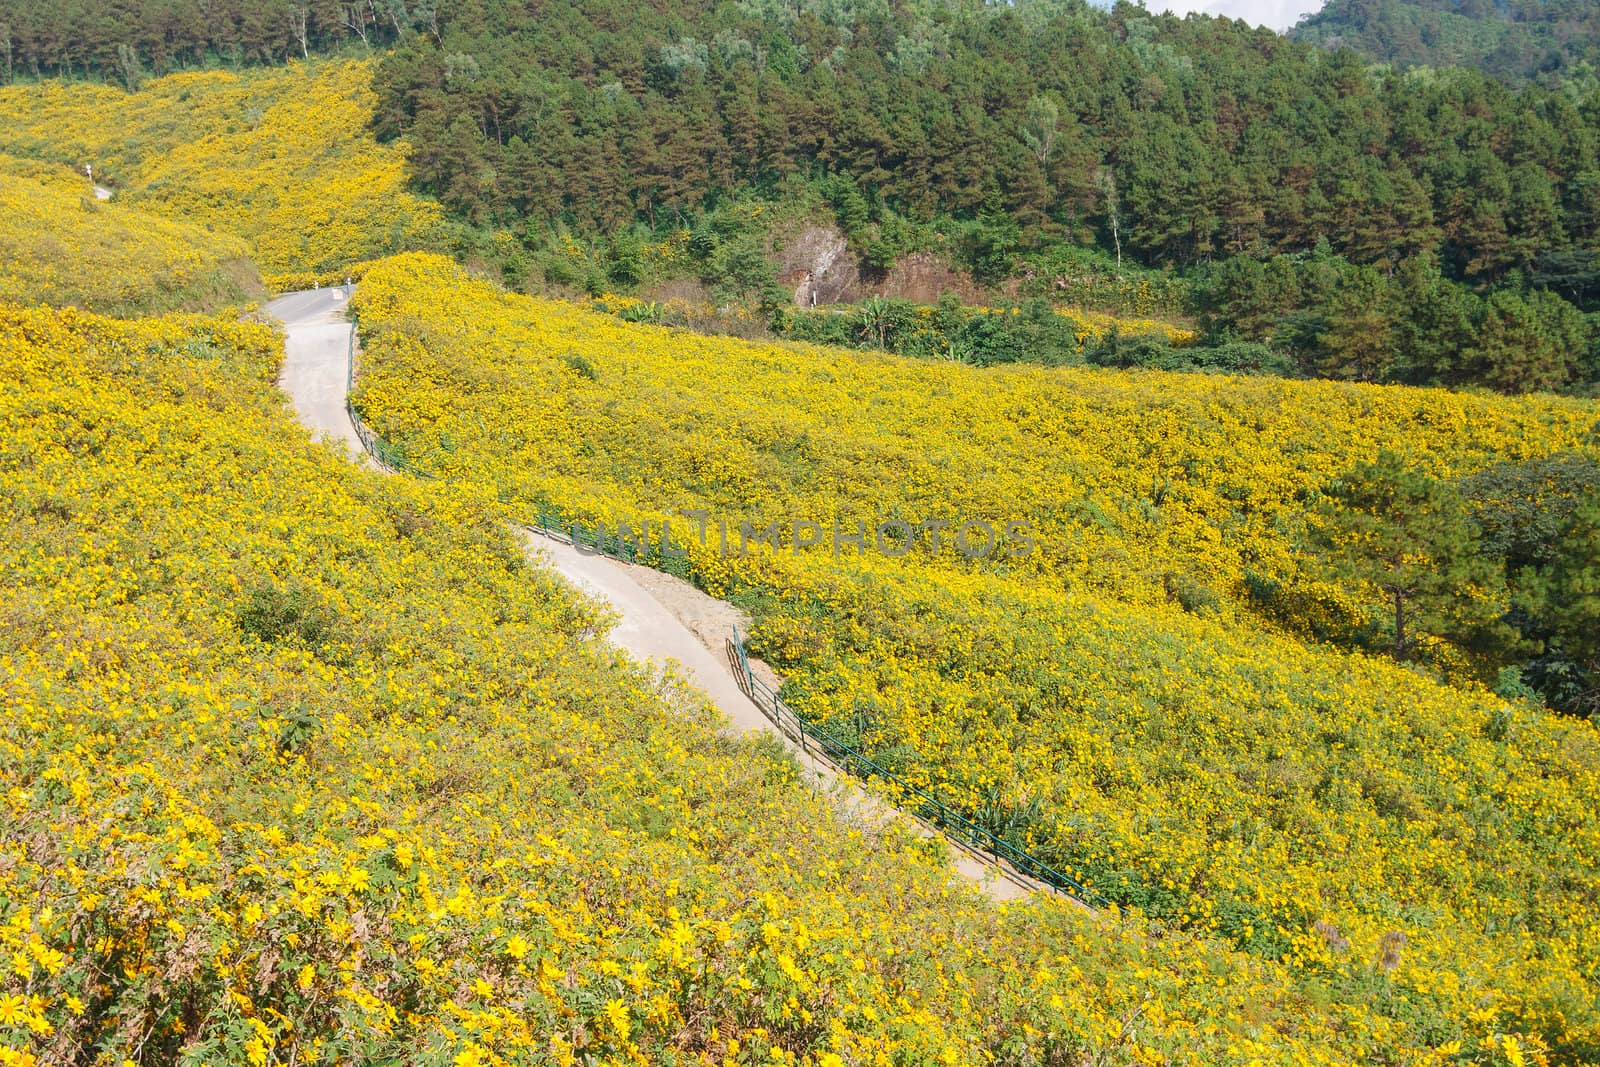 The field of yellow flowers in mountain